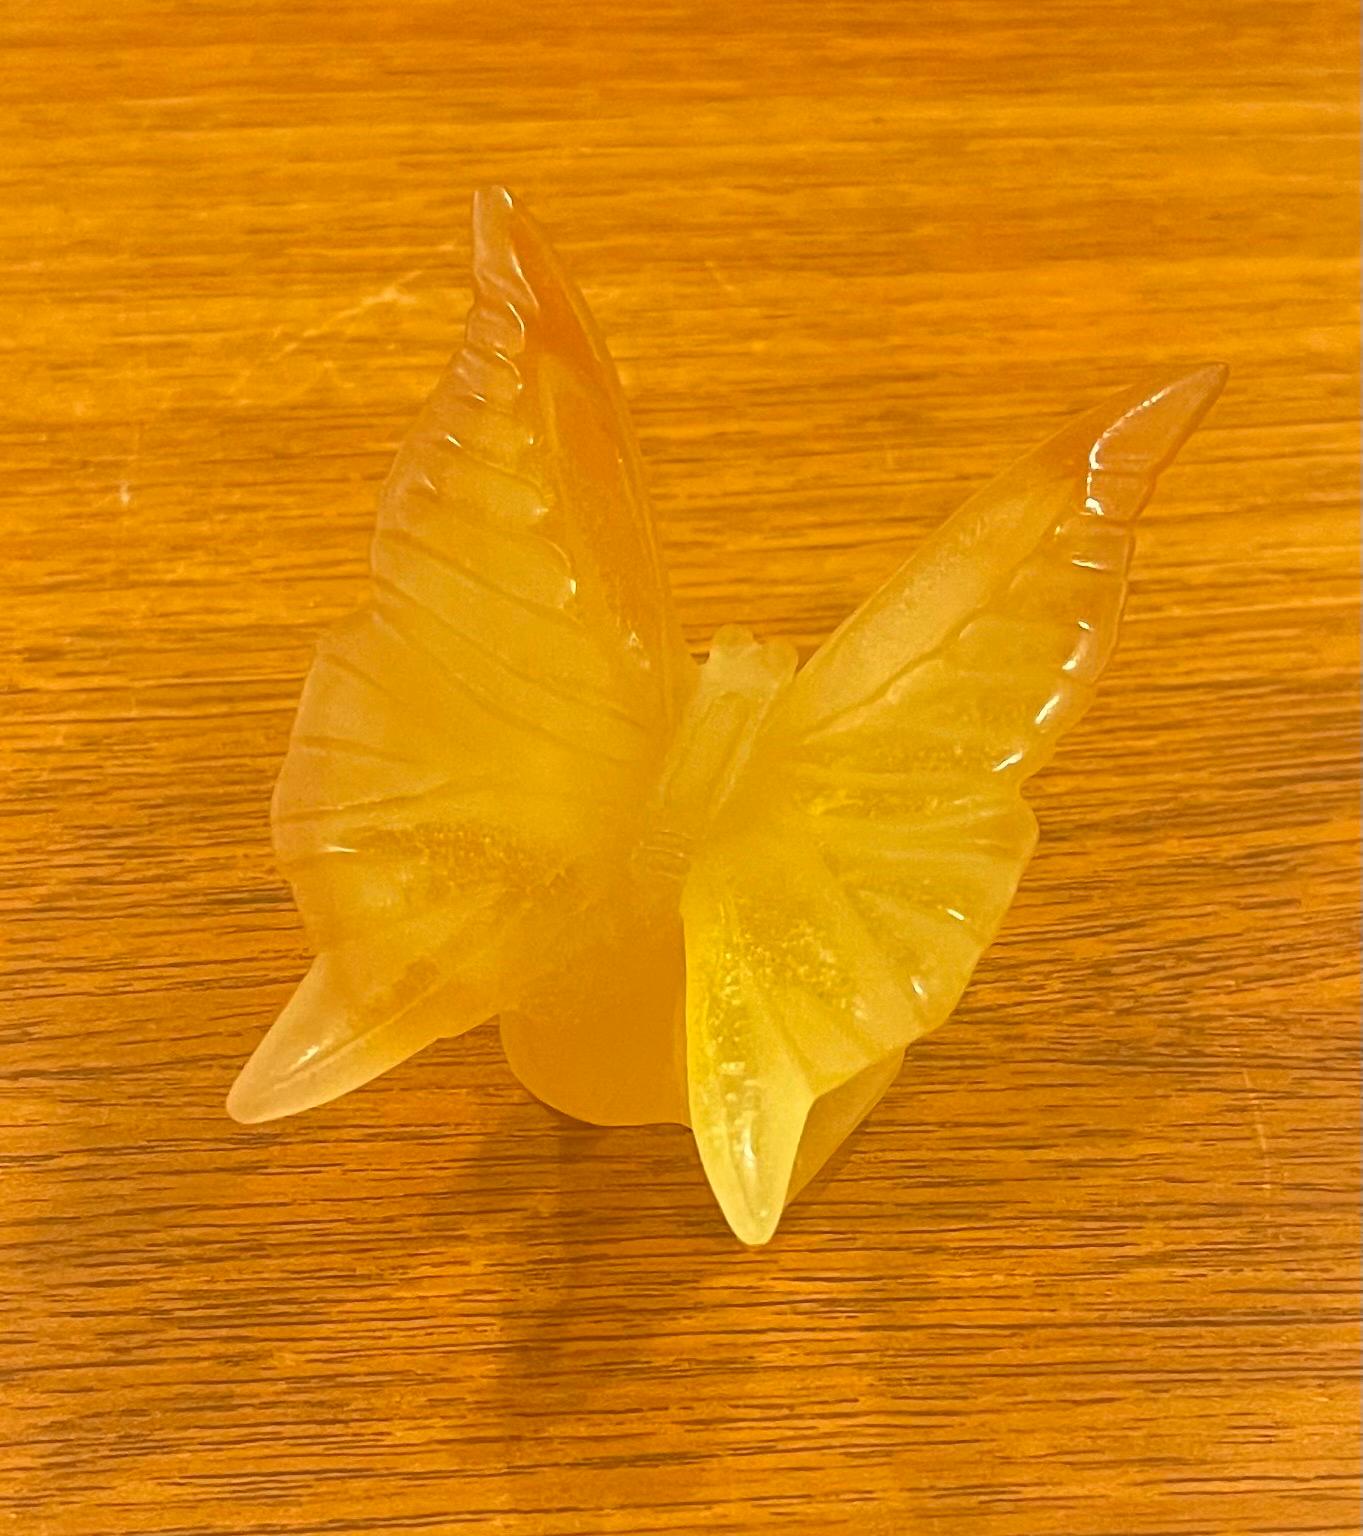 Small crystal butterfly sculpture / paperweight by Daum of France, circa 1970s. The etched signature reads 